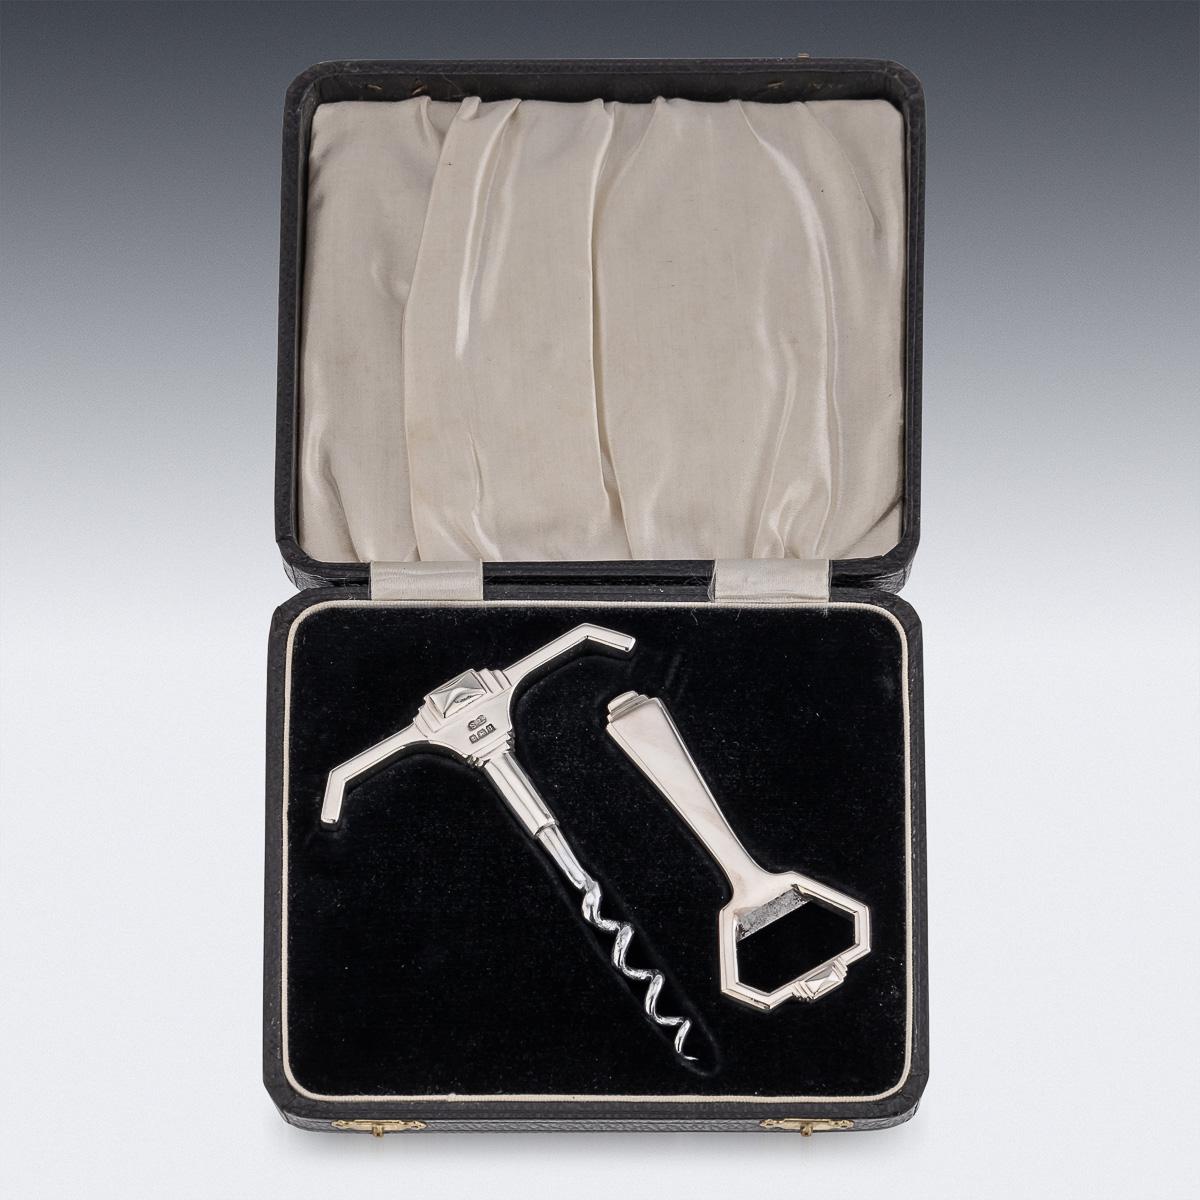 Superb mid-20th Century art deco solid silver corkscrew and bottle opener, the corkscrew has a steel helix screw mounted on the solid silver handle piece. The bottle opener is solid silver and in the same angled style. This corkscrew and bottle